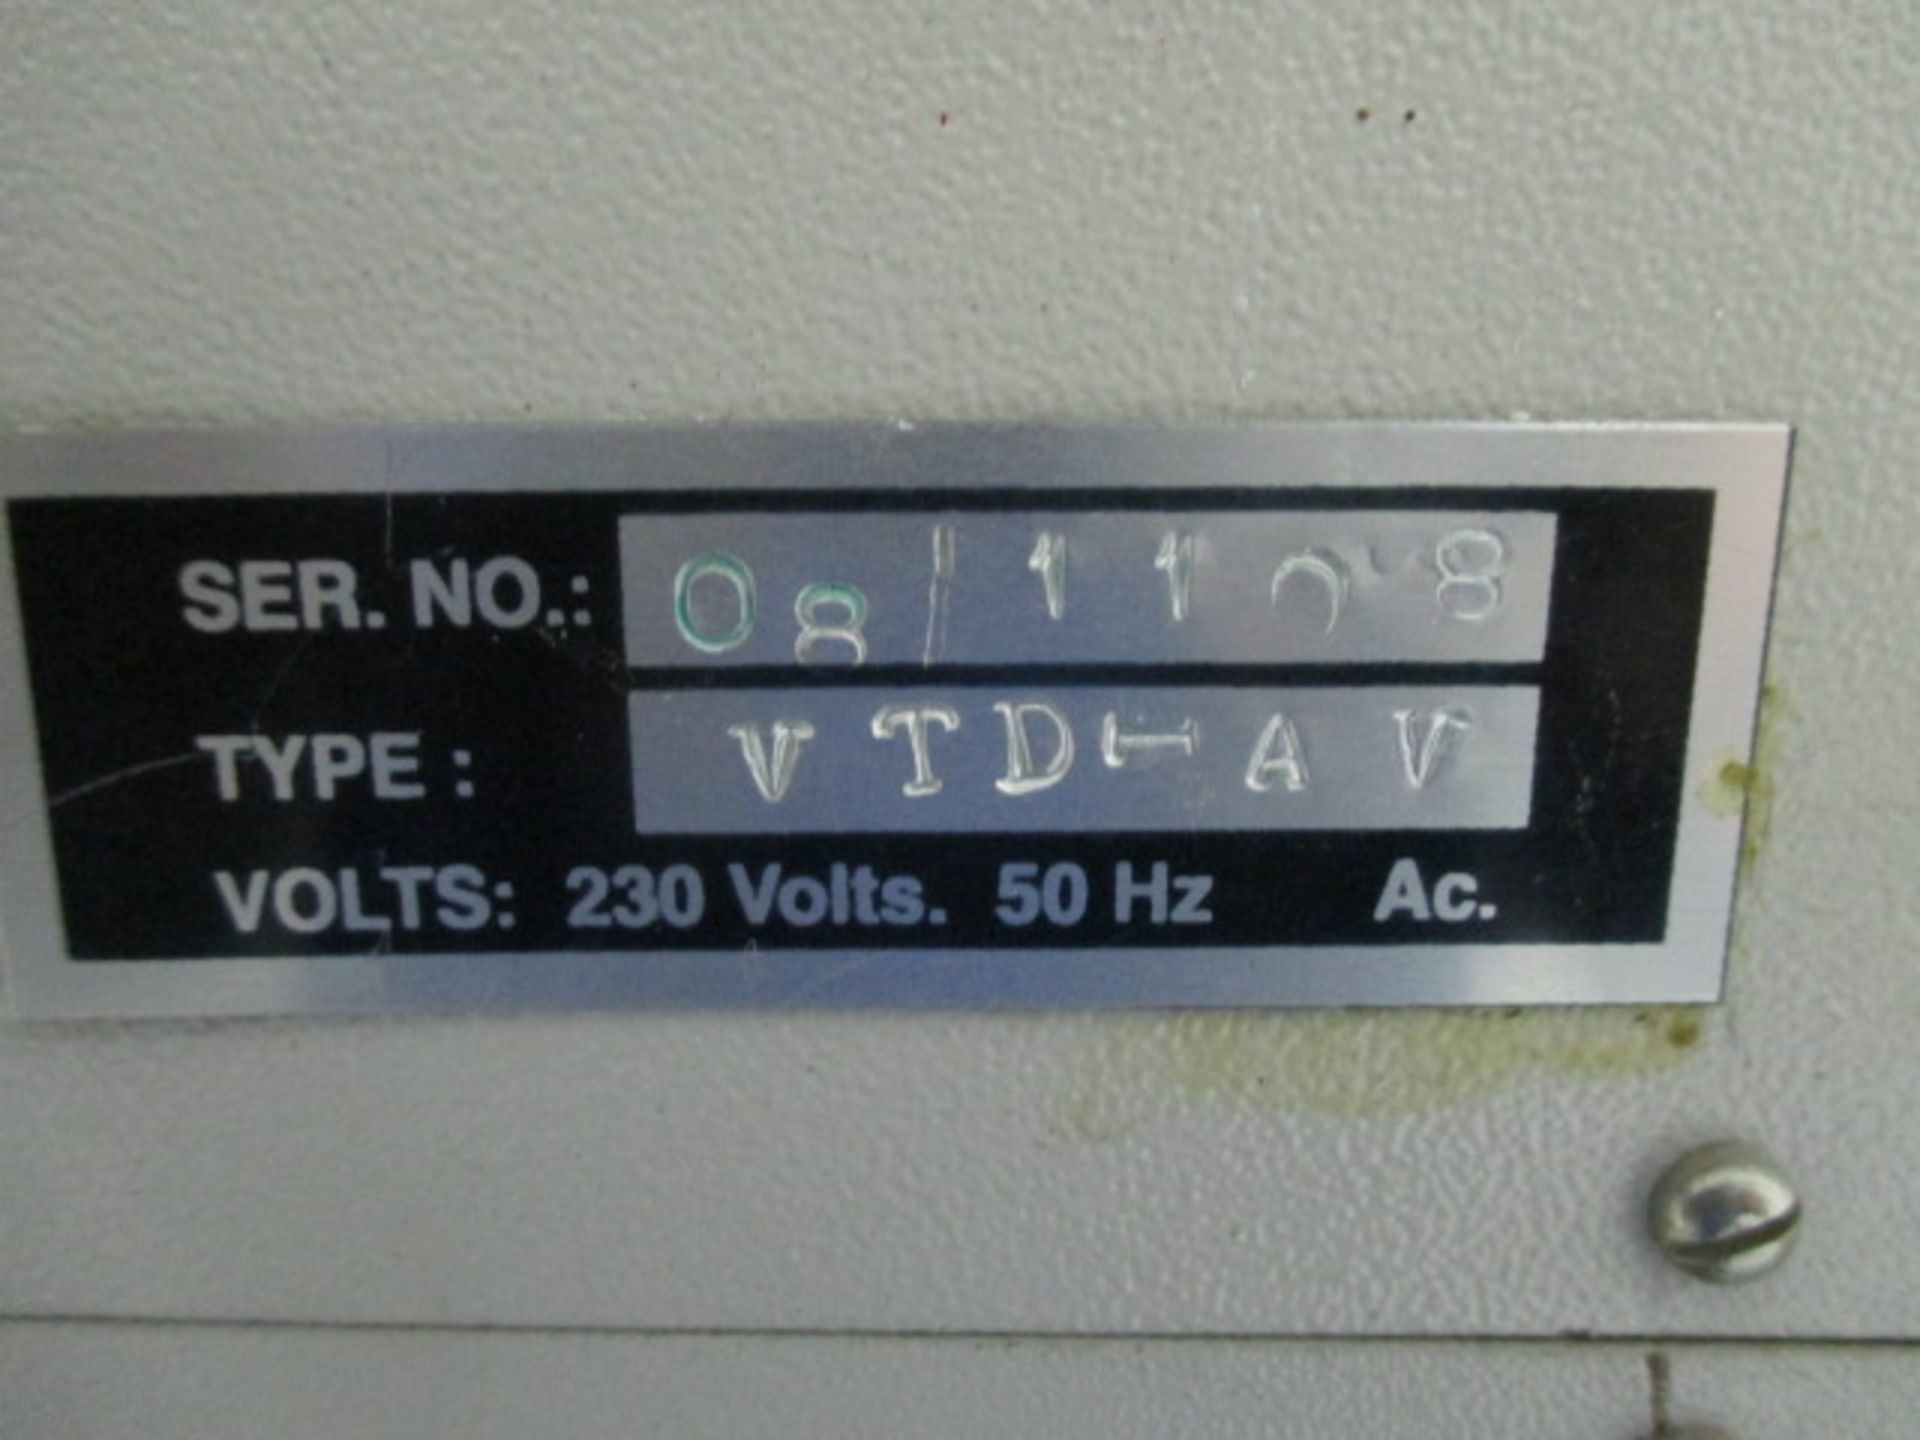 Veego tablet disintegration tester, type VTD-AV, two sample stations, with controls and display, - Image 8 of 8